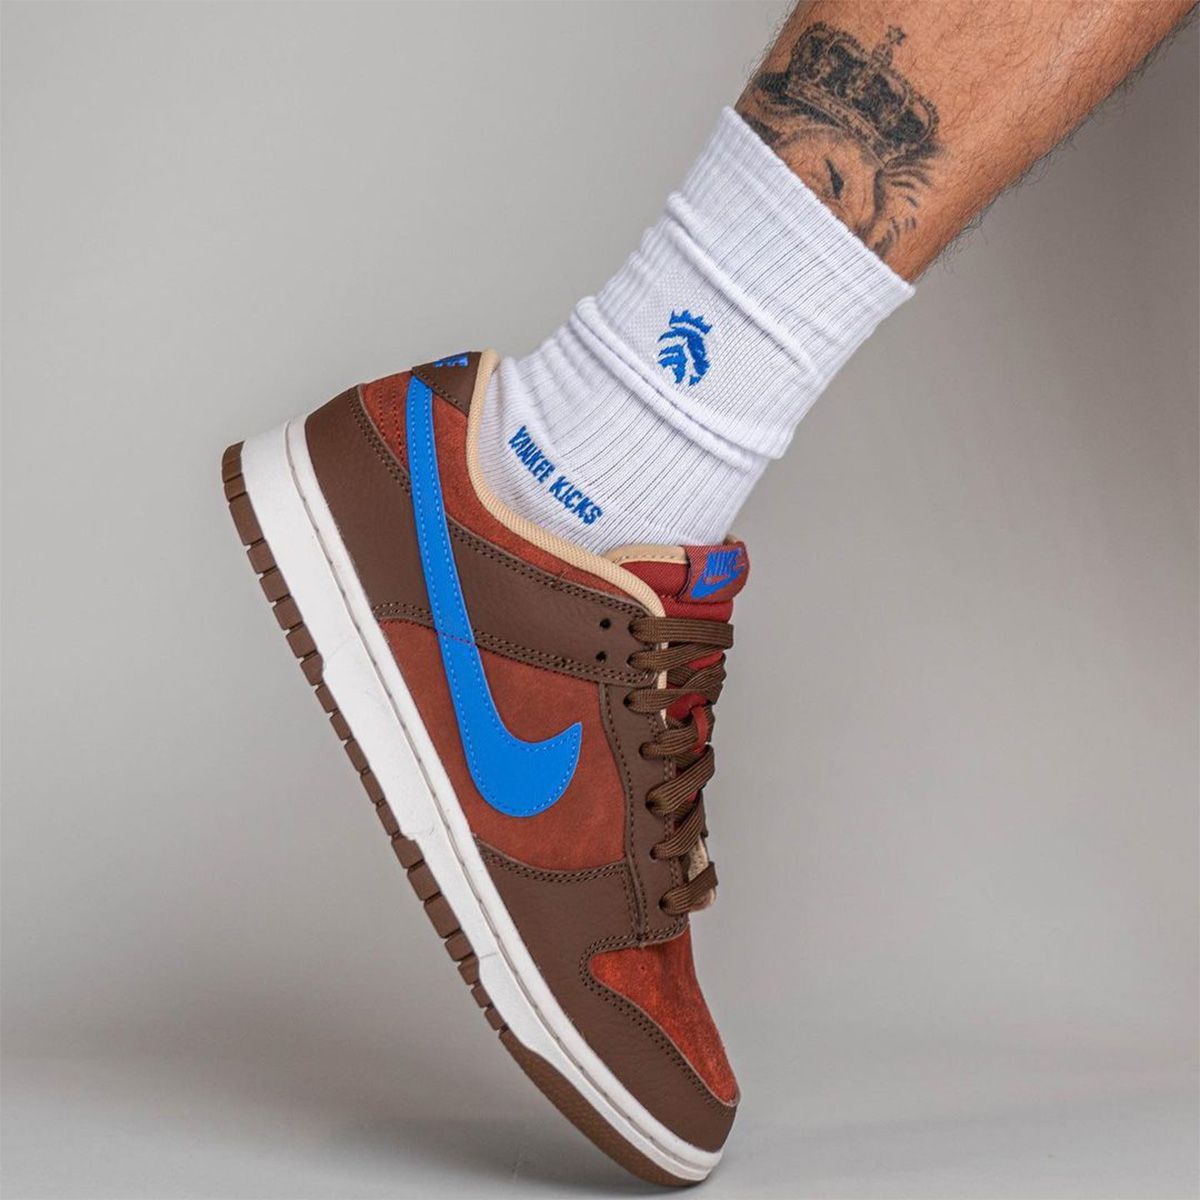 Where to Buy the Nike Dunk Low “Mars Stone” | House of Heat°